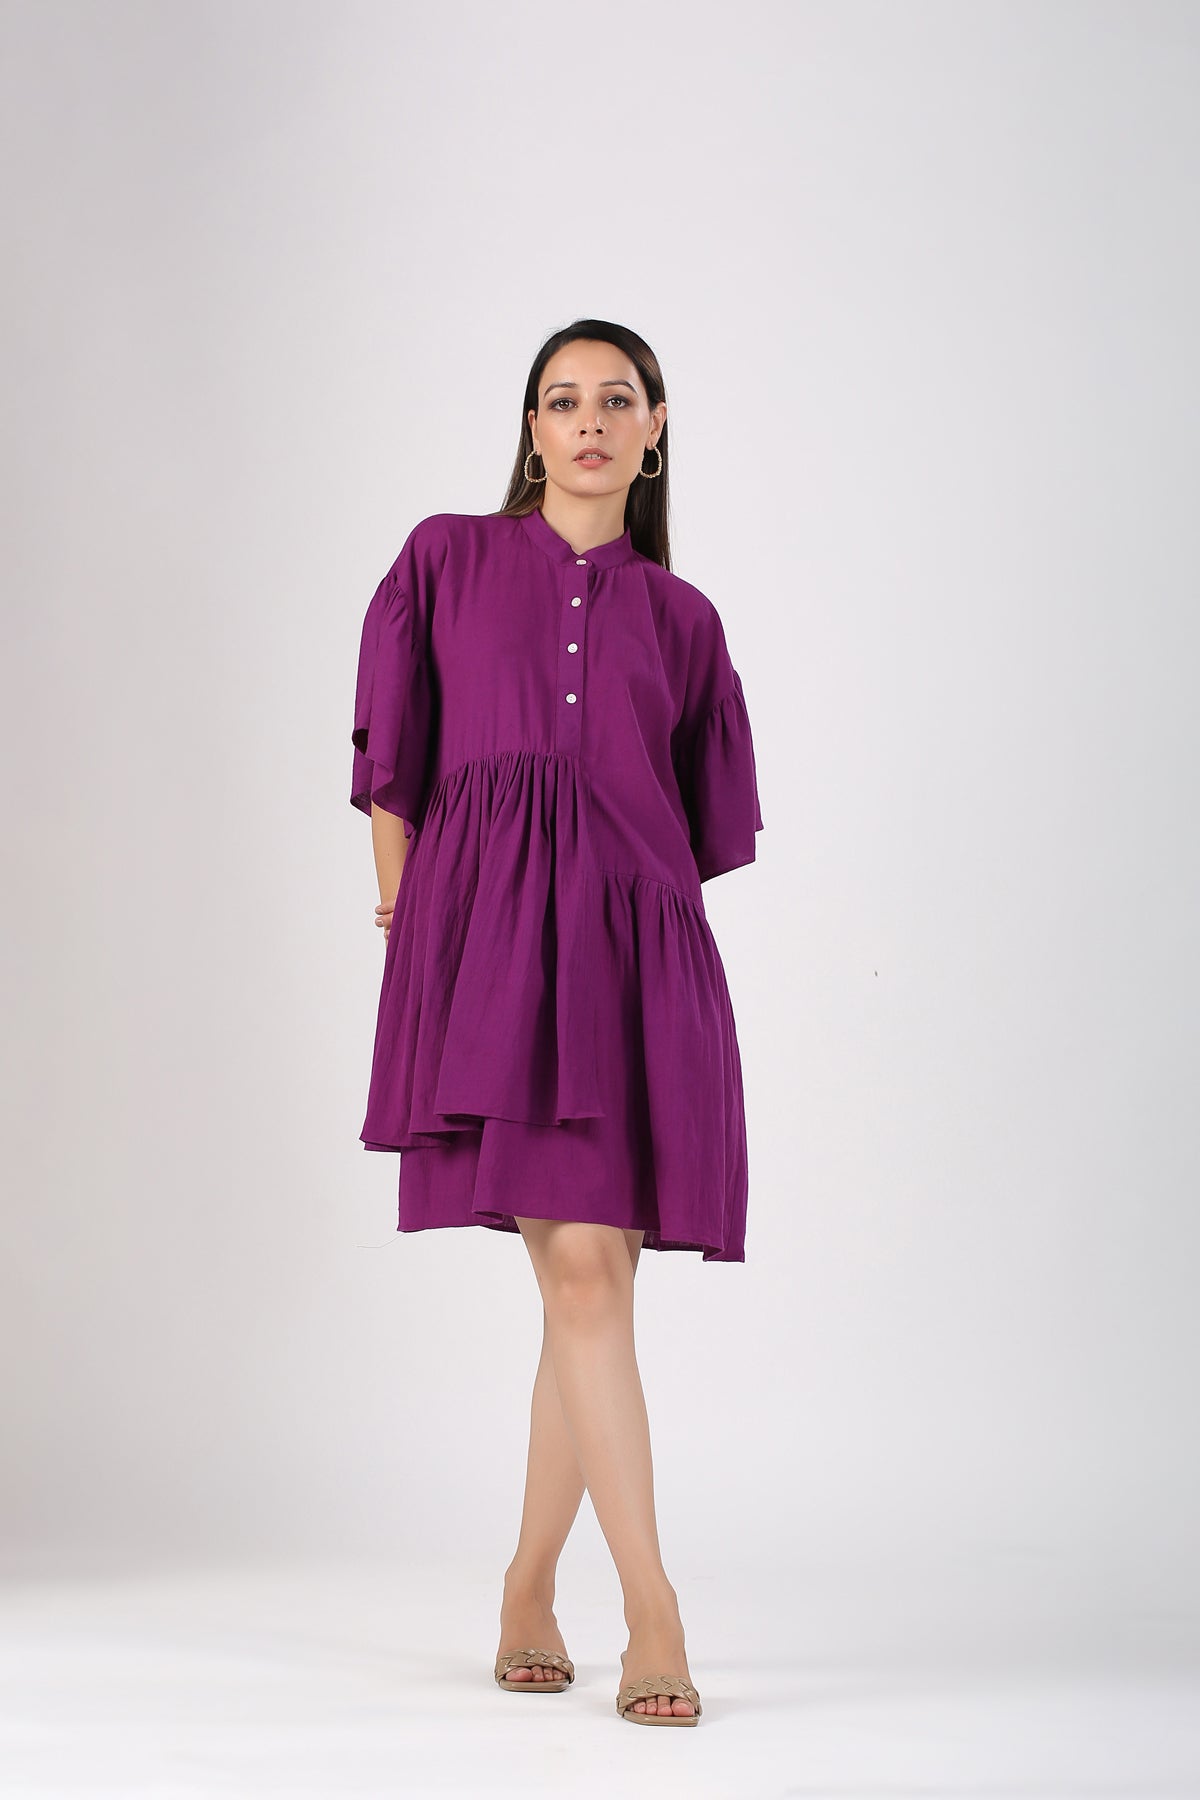 Purple Mini Dress at Kamakhyaa by MOH-The Eternal Dhaga. This item is Casual Wear, Cotton, Mini Dresses, Moh-The eternal Dhaga, Natural, Purple, Relaxed Fit, Shirt Dresses, Solids, Womenswear